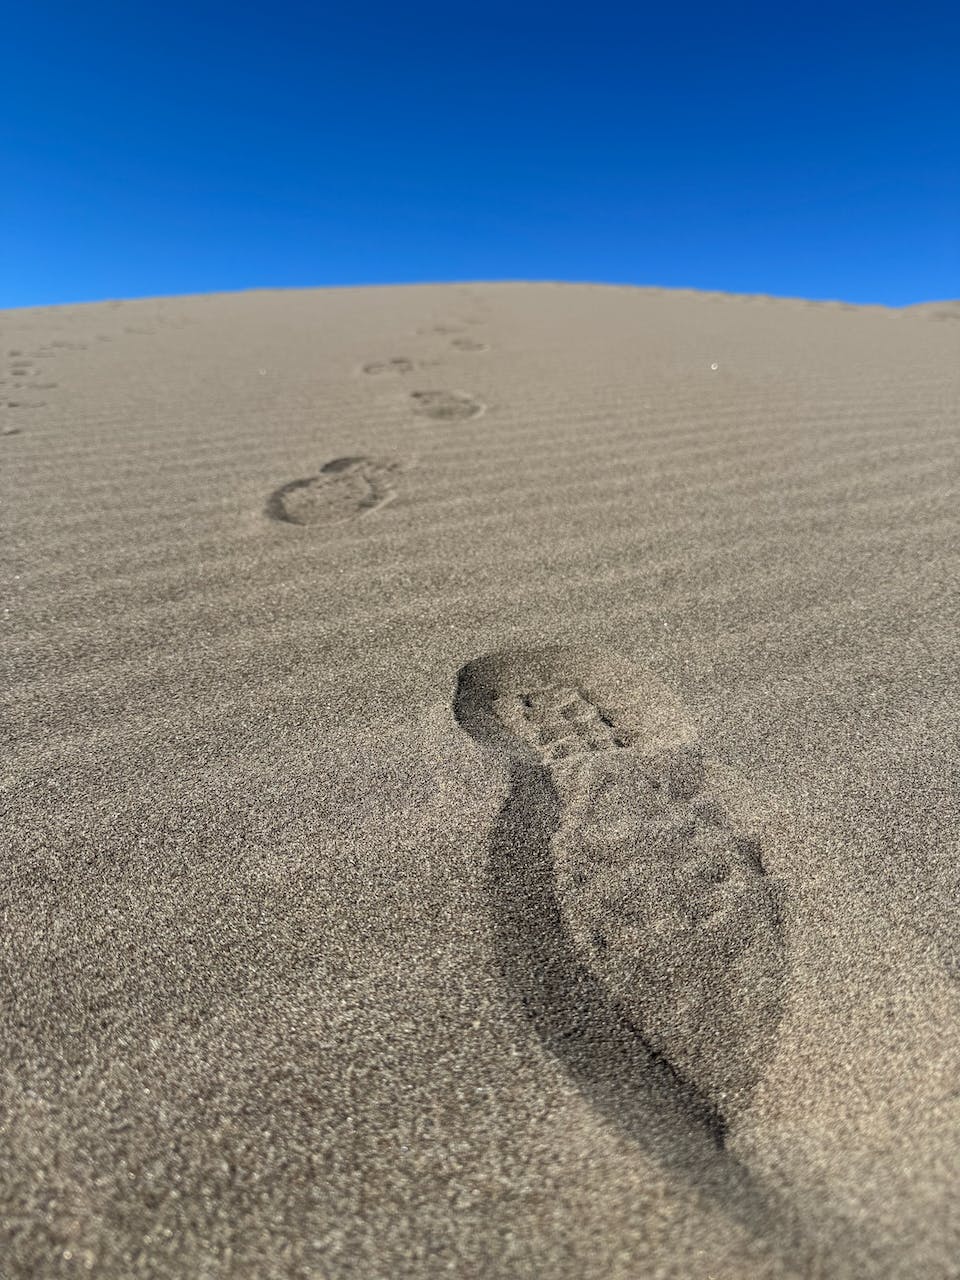 Hiking boot footprints in a sand dune at Great Dunes National Park